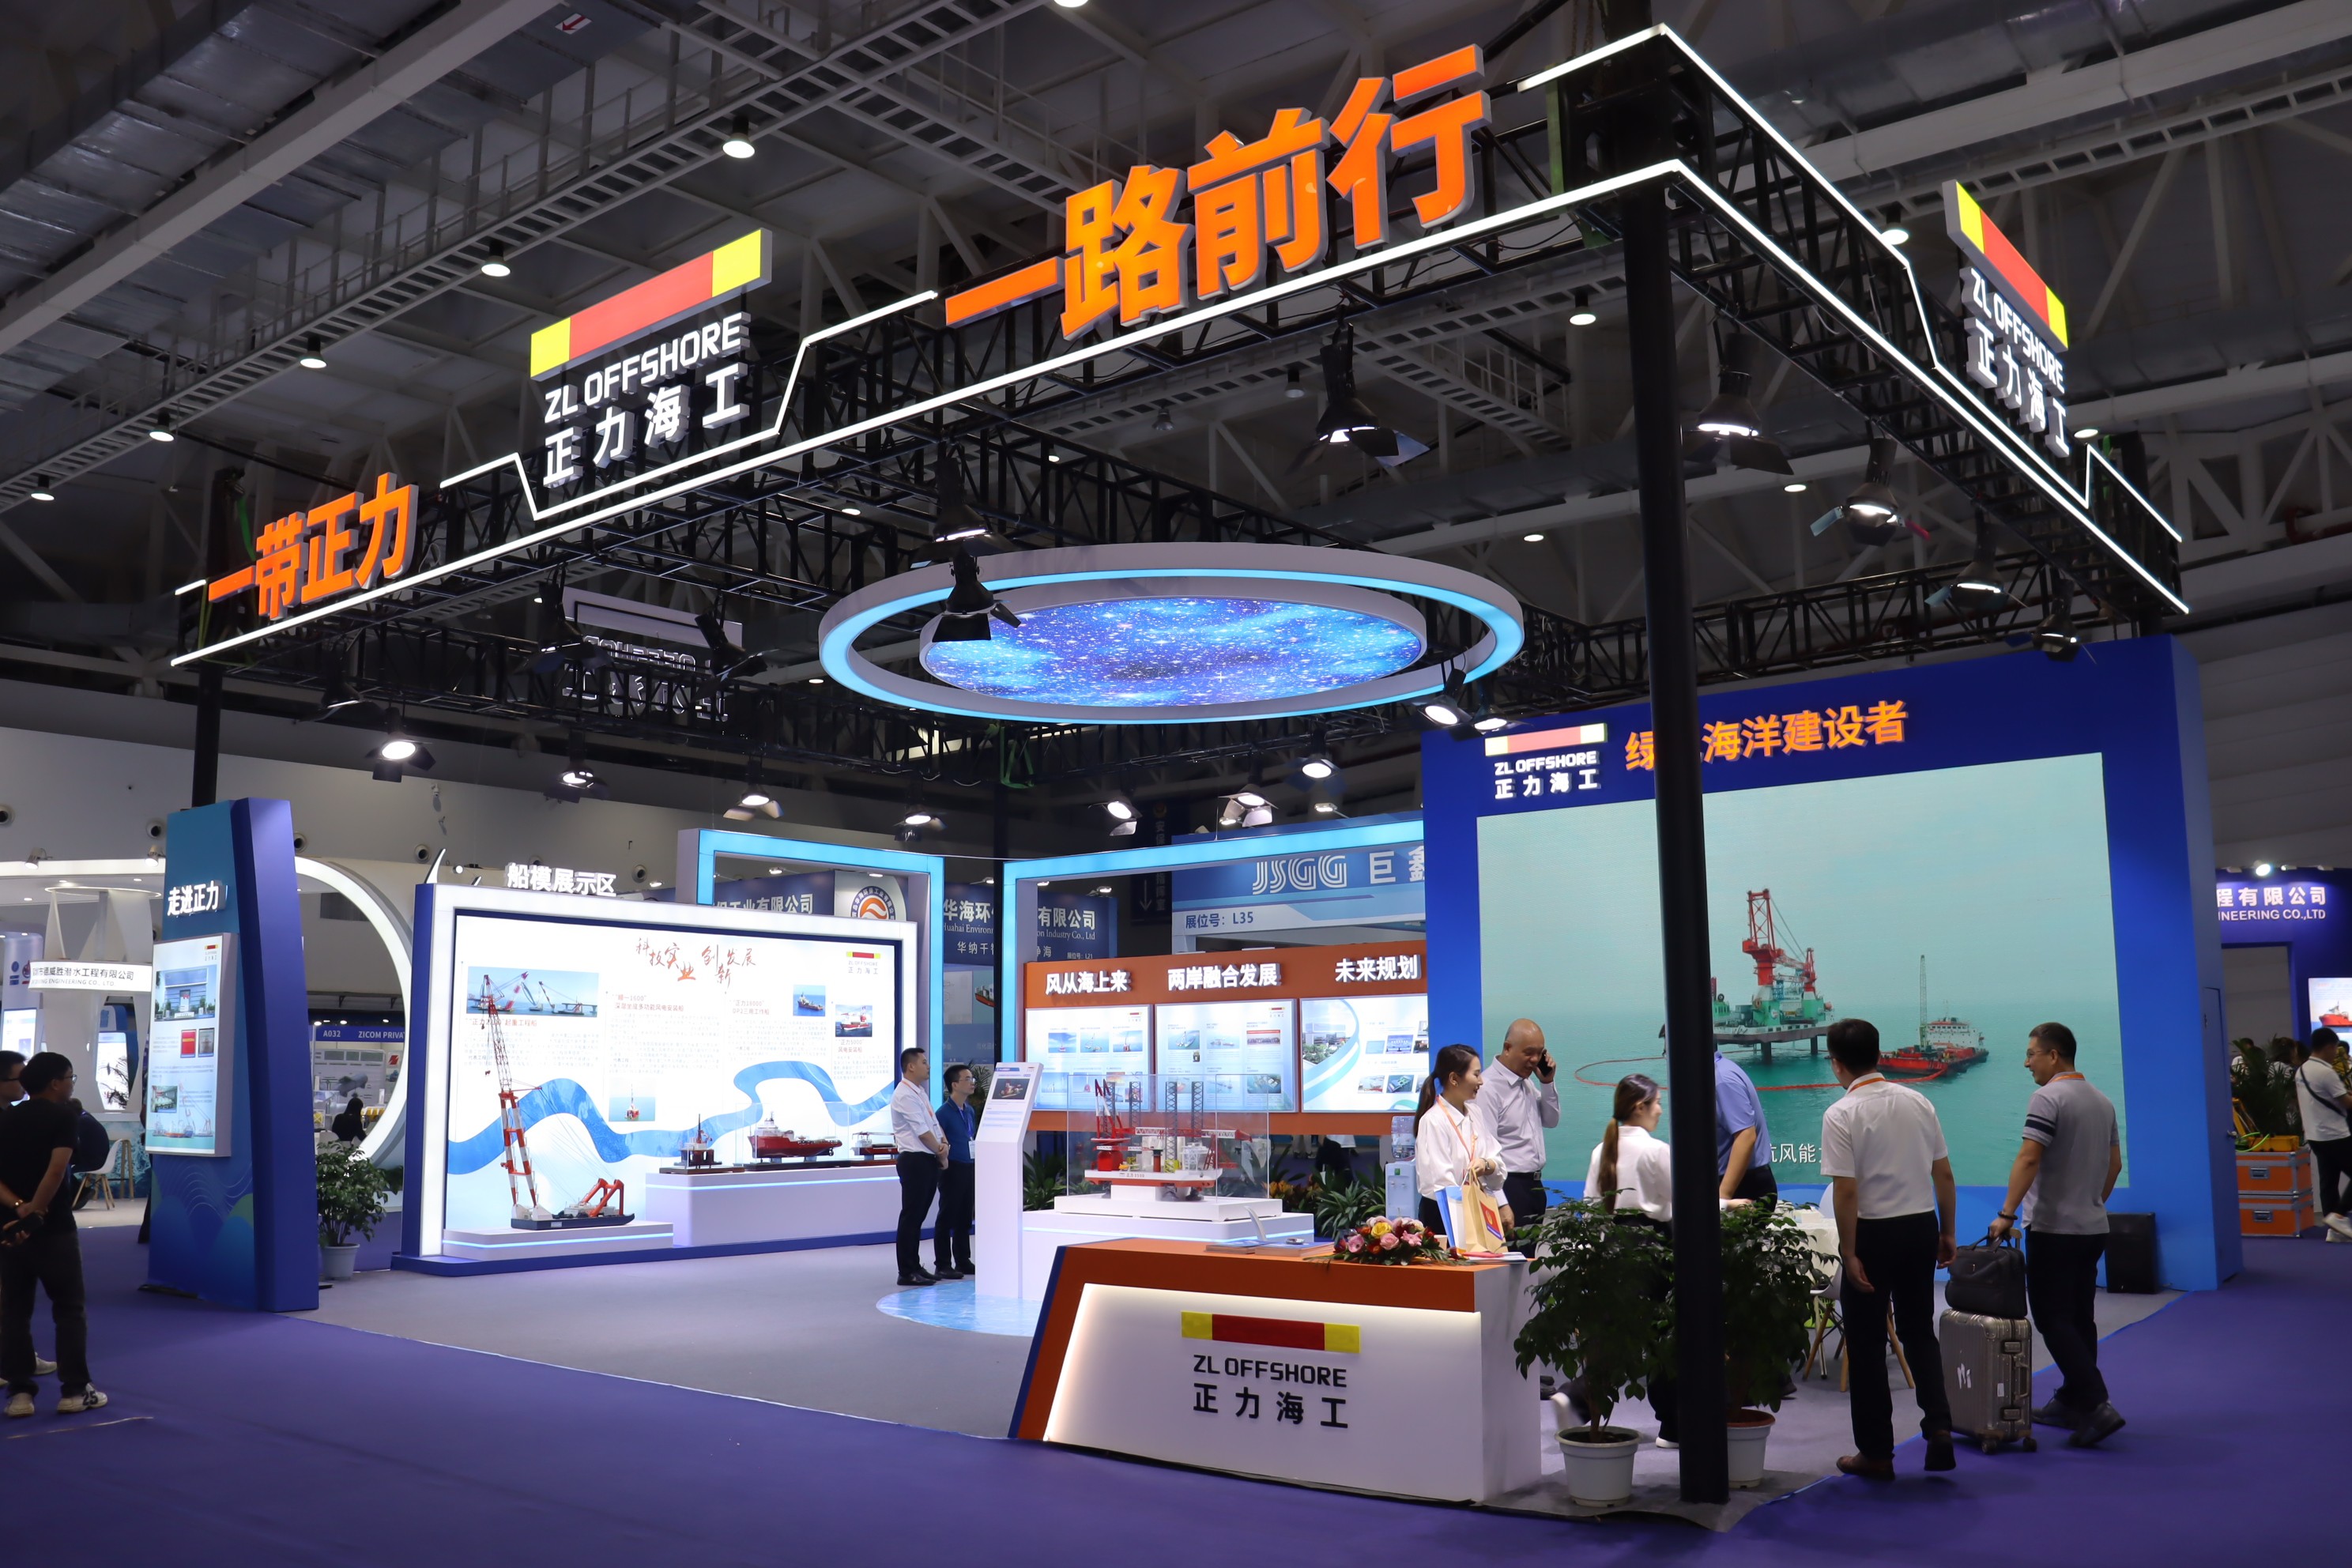 The 6th International Diving Salvage and Marine Engineering Equipment Exhibition was successfully held to “gather industry strength and serve the high-quality development of the marine economy“.